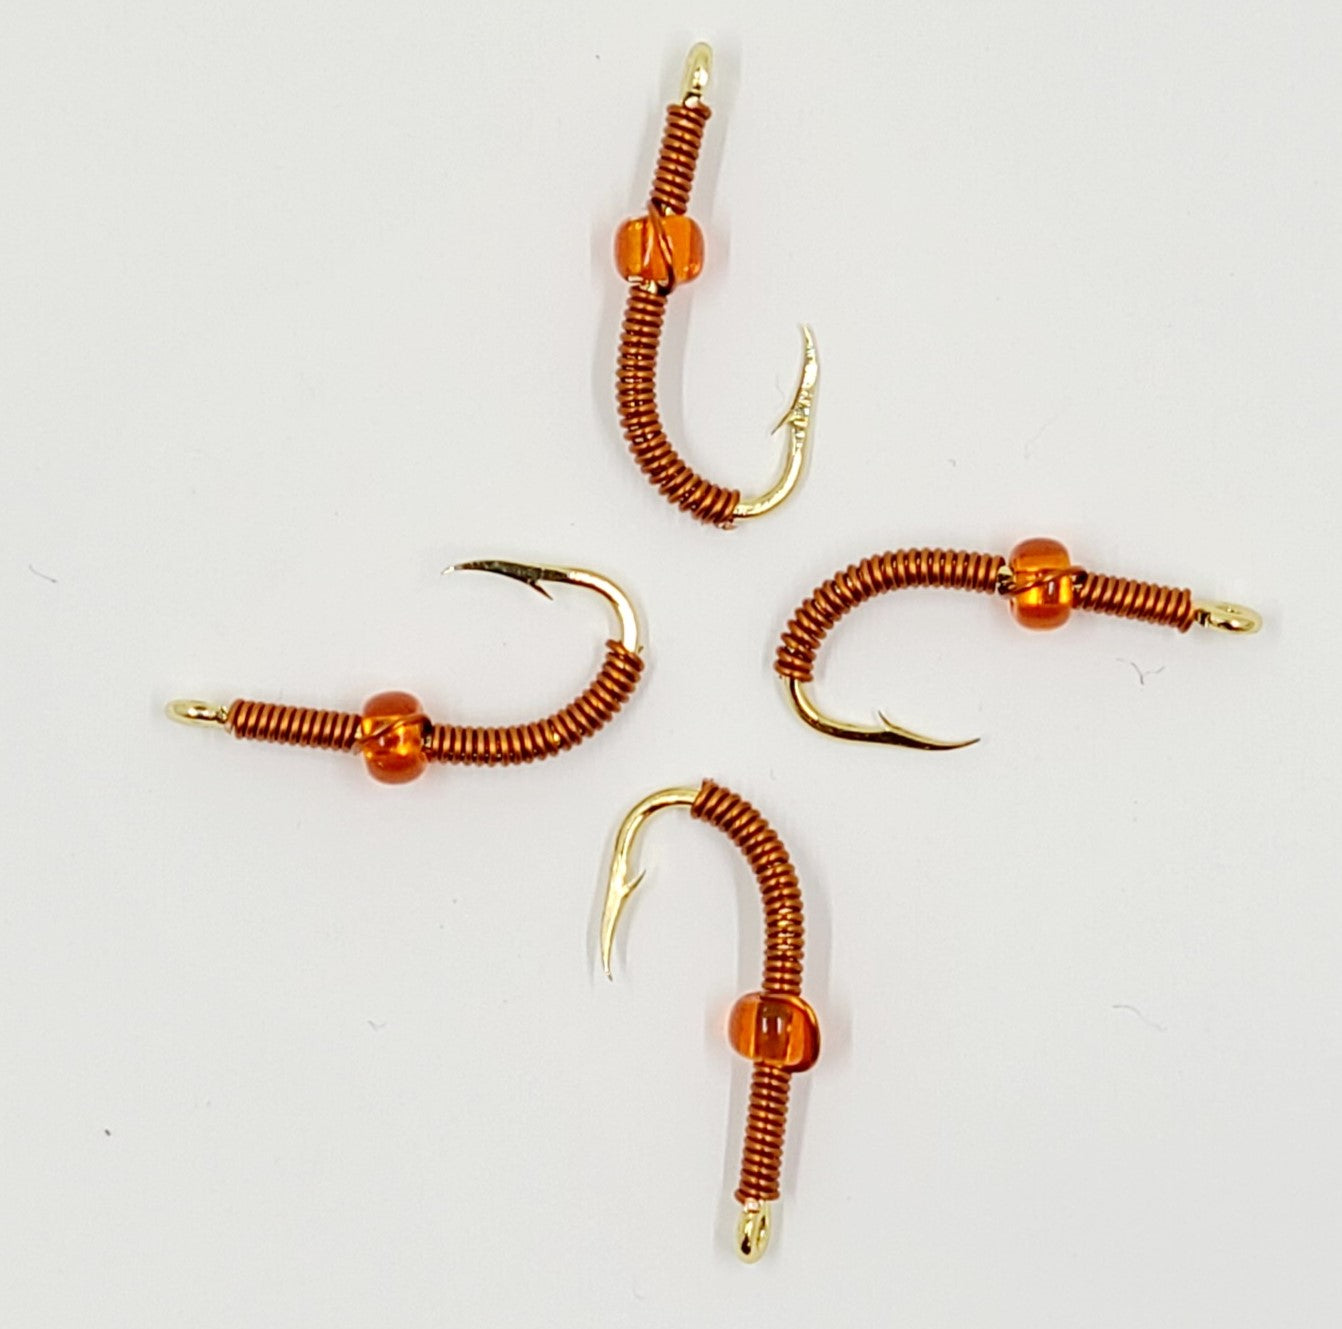 Wire Worm Gold Hook Size 6 - Get'n Hook'd Lures